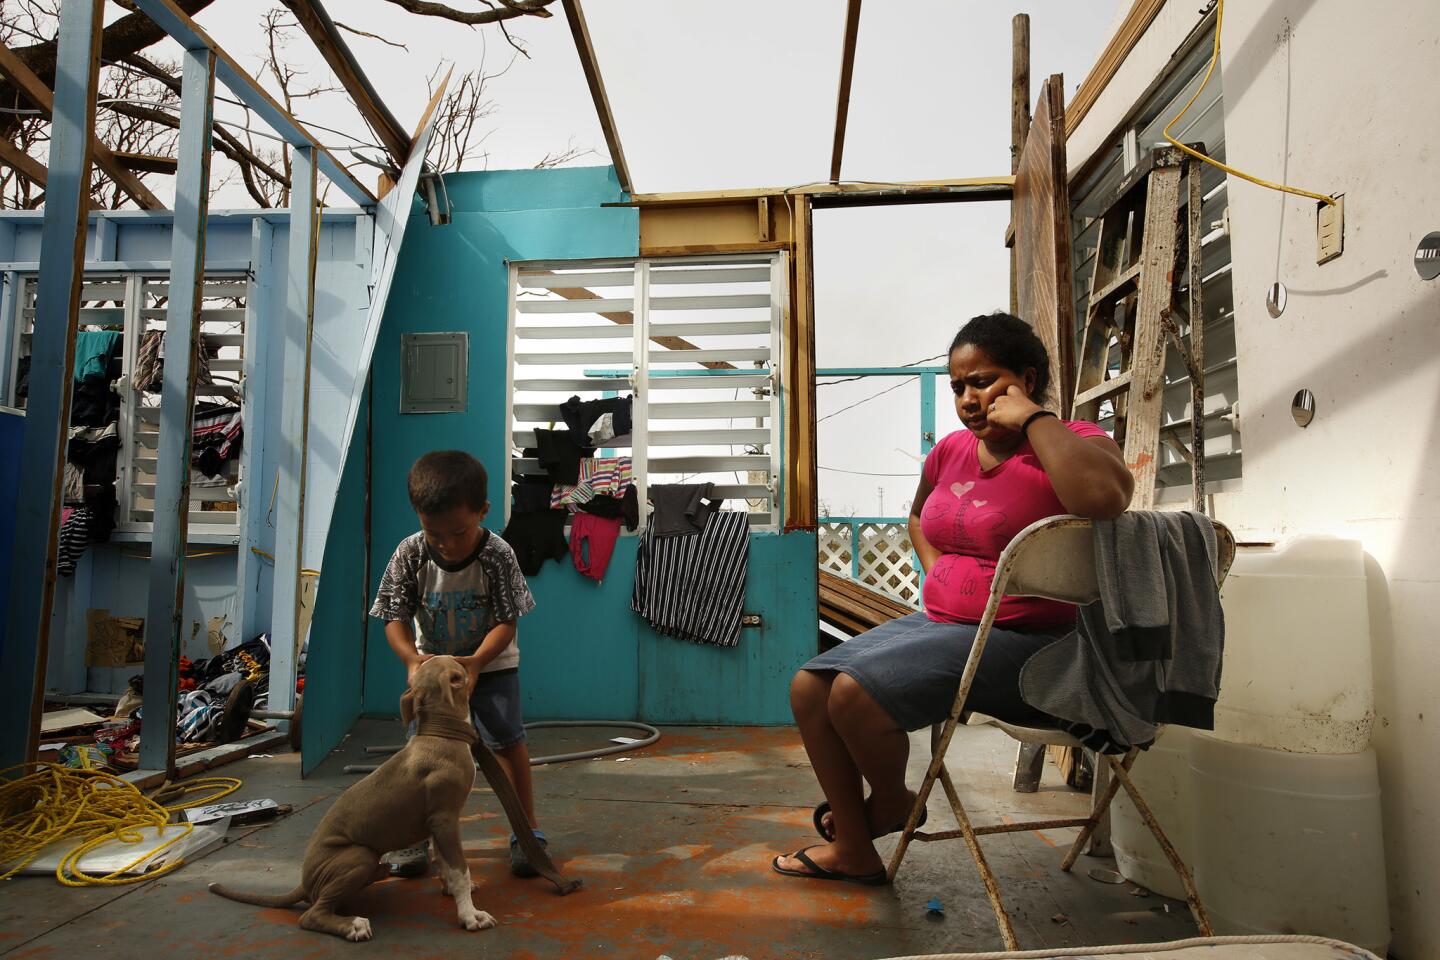 Heydee Perez, age 29, and her son, Yeriel Calera, age 4, have not received any aid one week after Hurricane Maria hit Puerto Ricl. The roof of their home is gone and they have very little to eat.